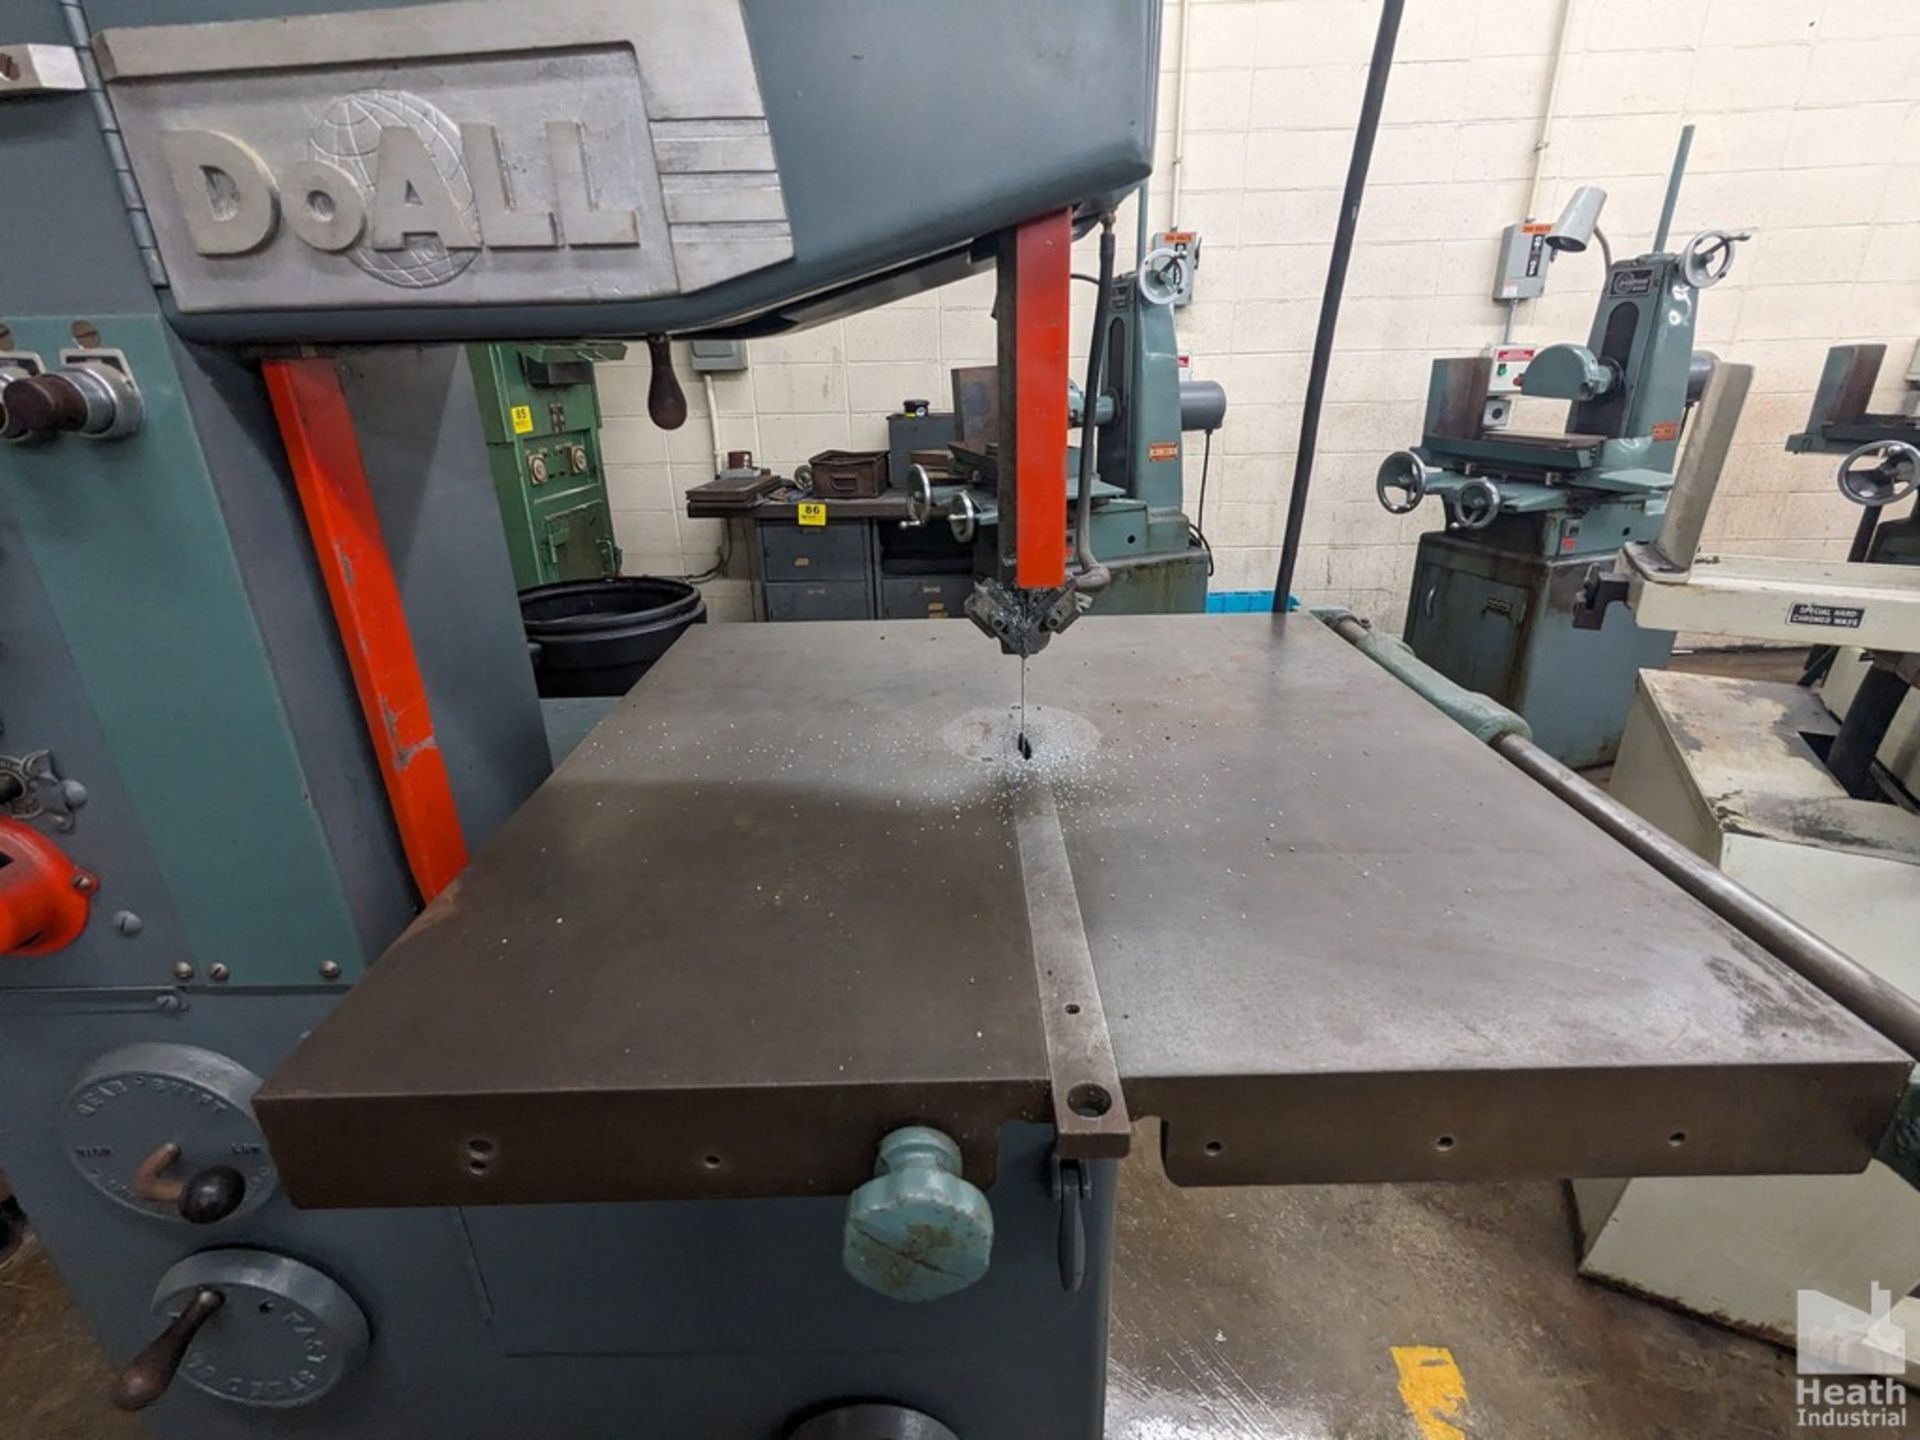 DOALL 16" MODEL 16-2 VERTICAL BAND SAW, S/N 45-55633 WITH BLADE WELDER Loading Fee :$150 - Image 7 of 8